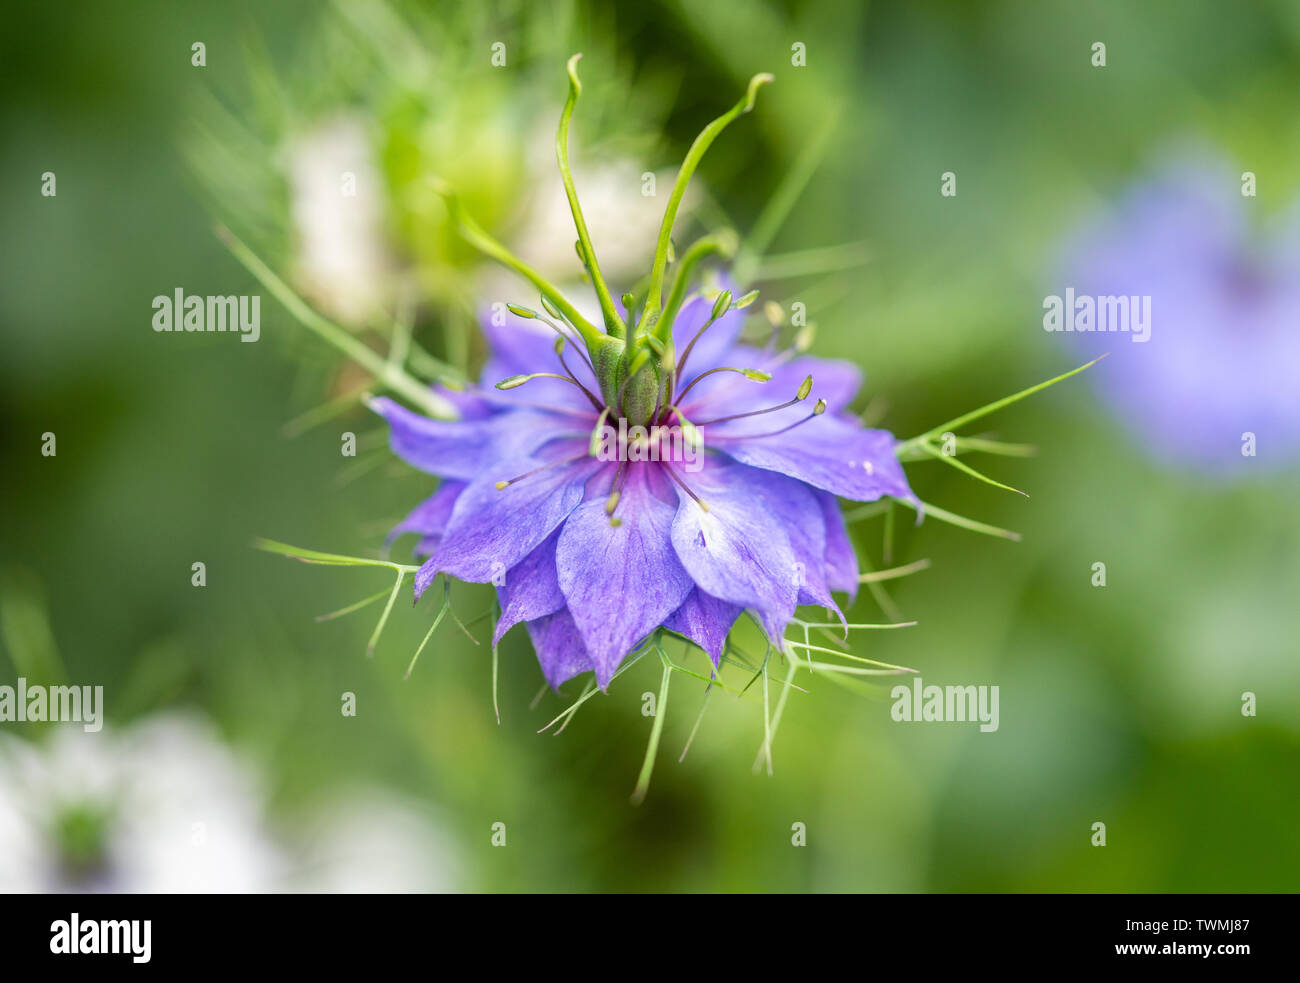 Macro of the lilac flower of a Nigella damascena or also knows as love-in-a-mist, ragged lady or devil in the bush in a garden in Southern England, UK Stock Photo